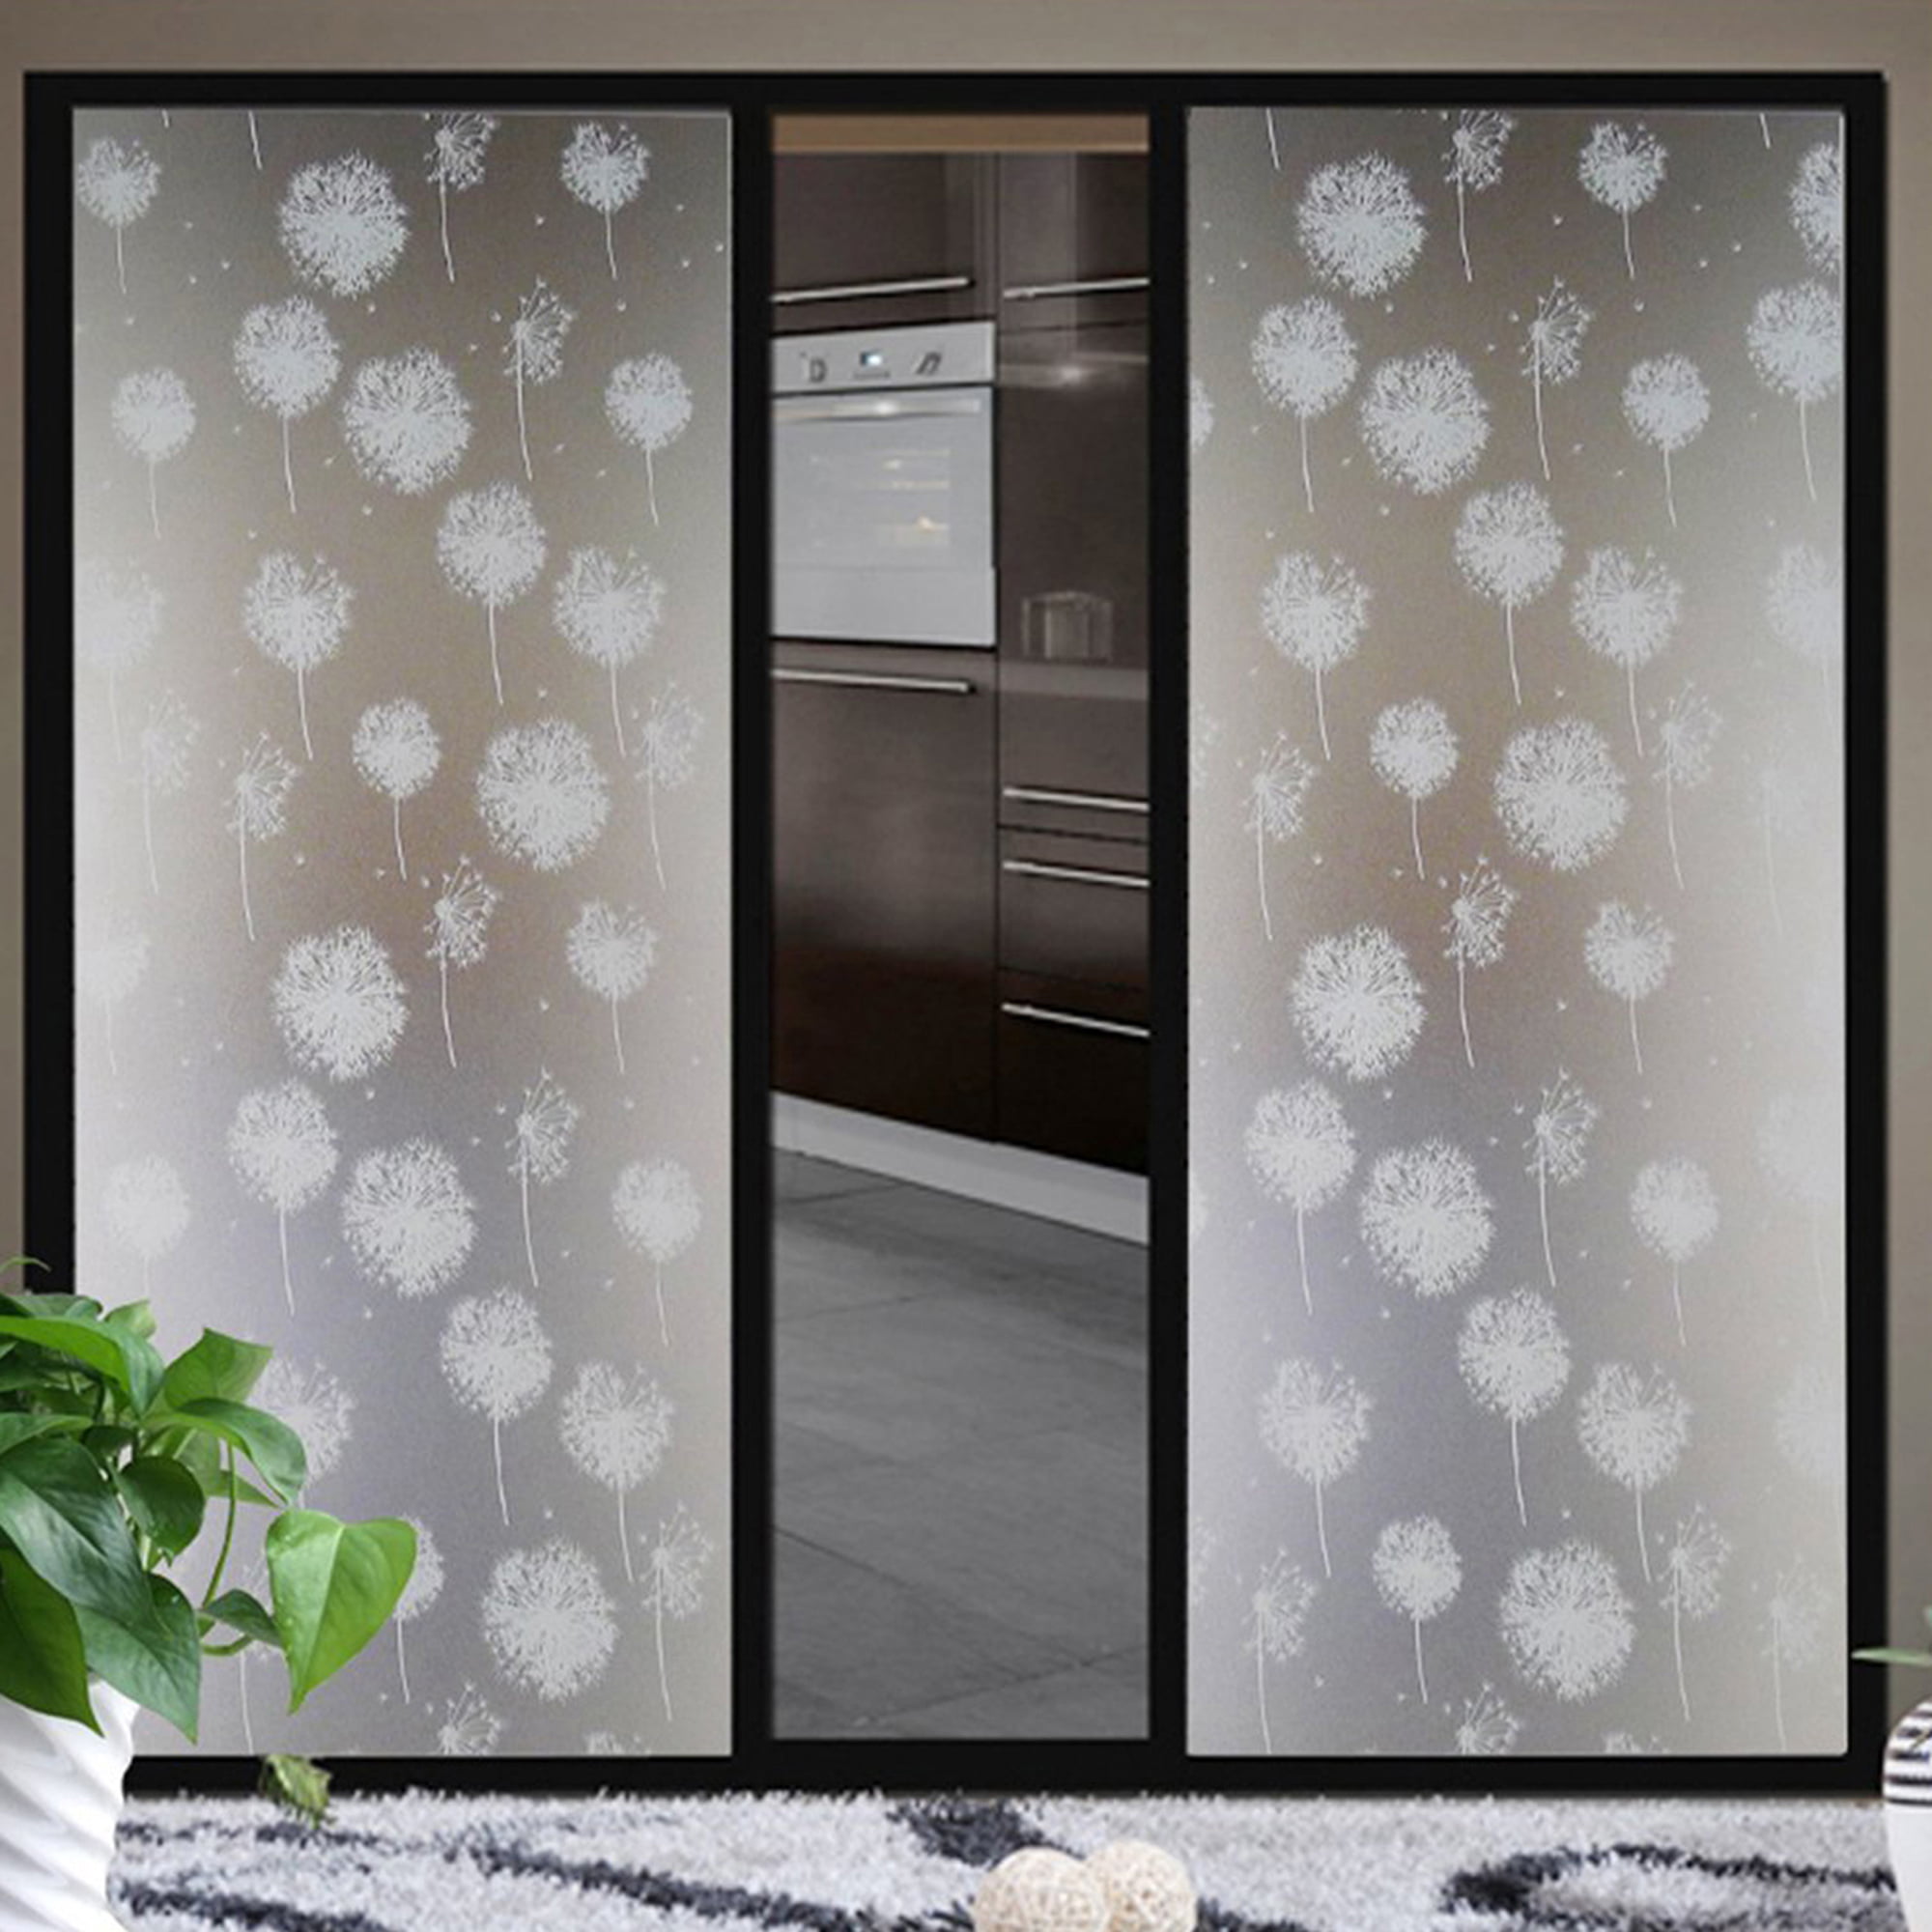 PVC Frosted Glass Window Privacy Self Adhesive Film Sticker Bathroom Home Decor 